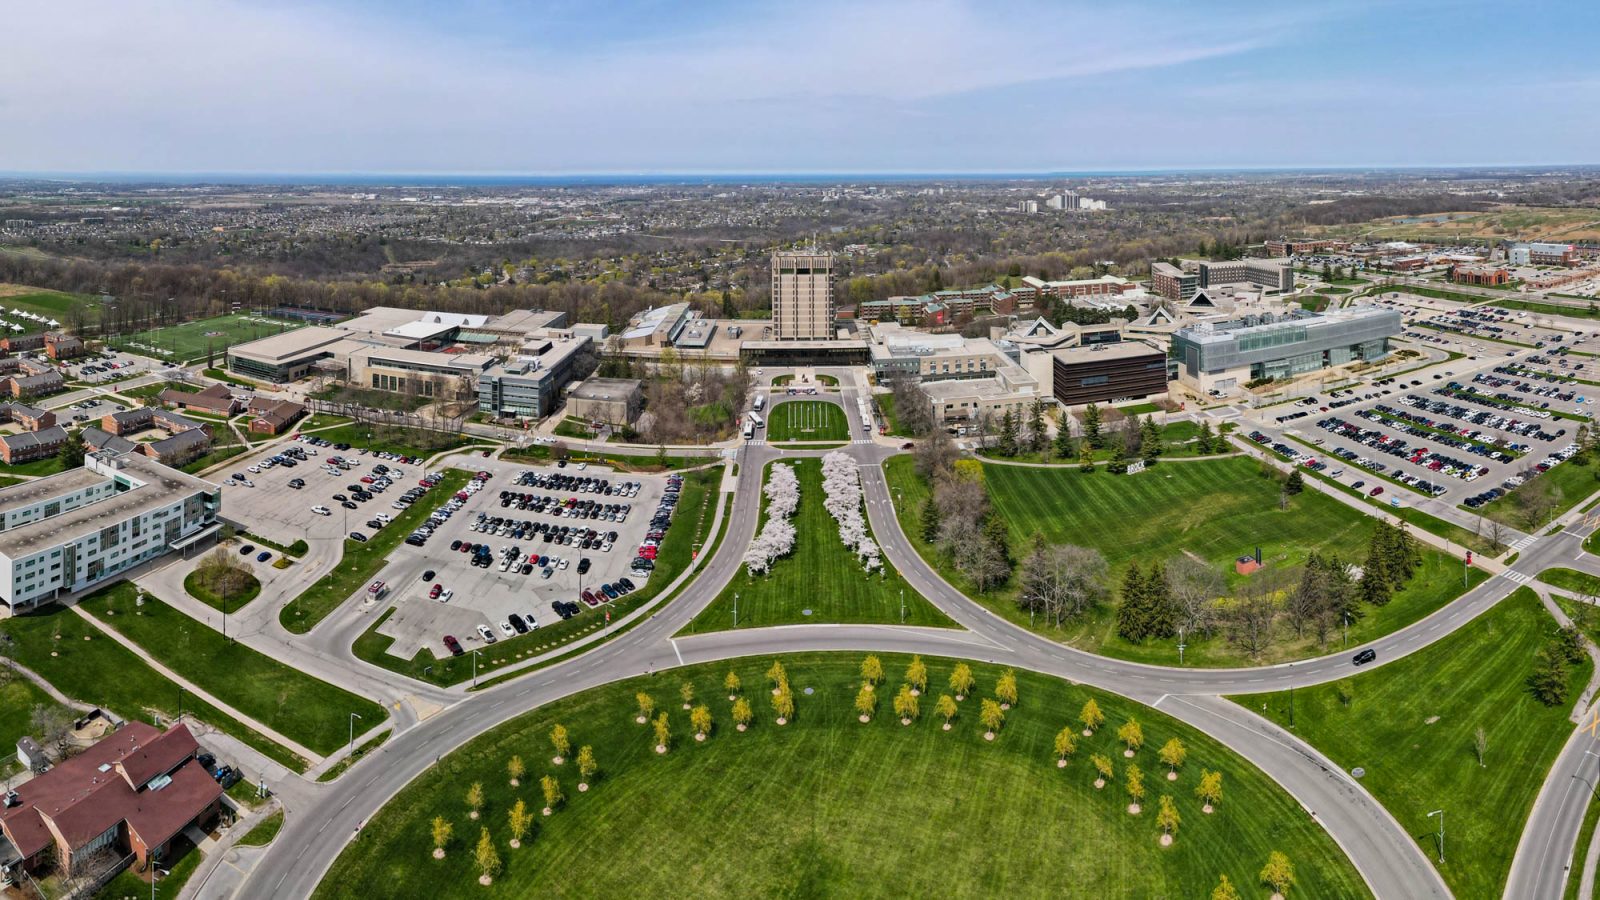 An aerial view of Brock University’s main campus with a traffic circle in the centre.